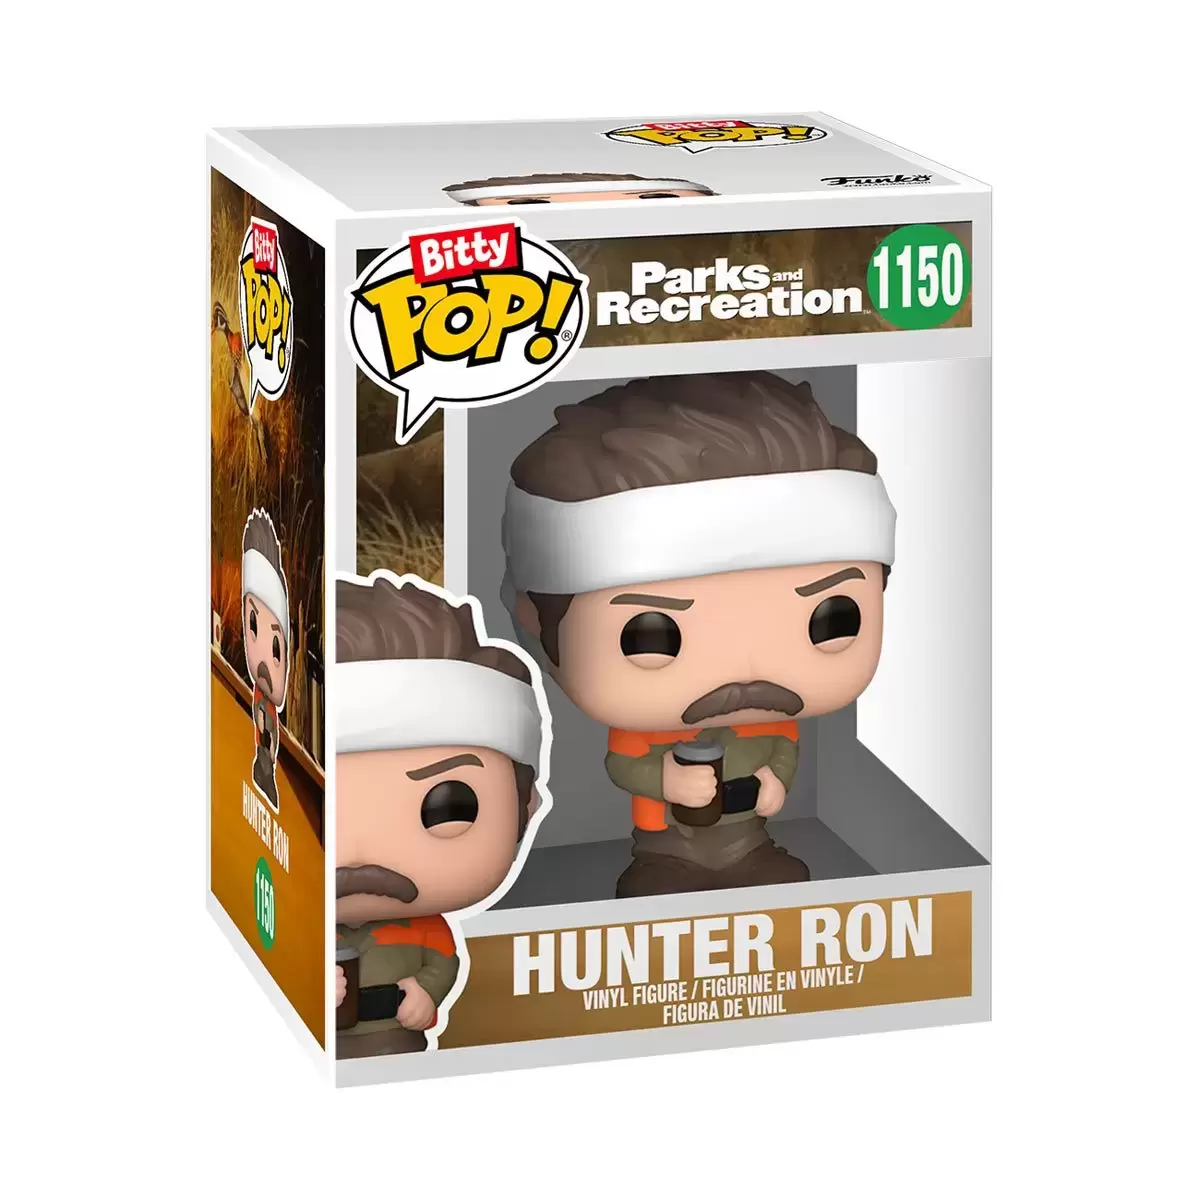 Bitty POP! - Parks And Recreation - Hunter Ron